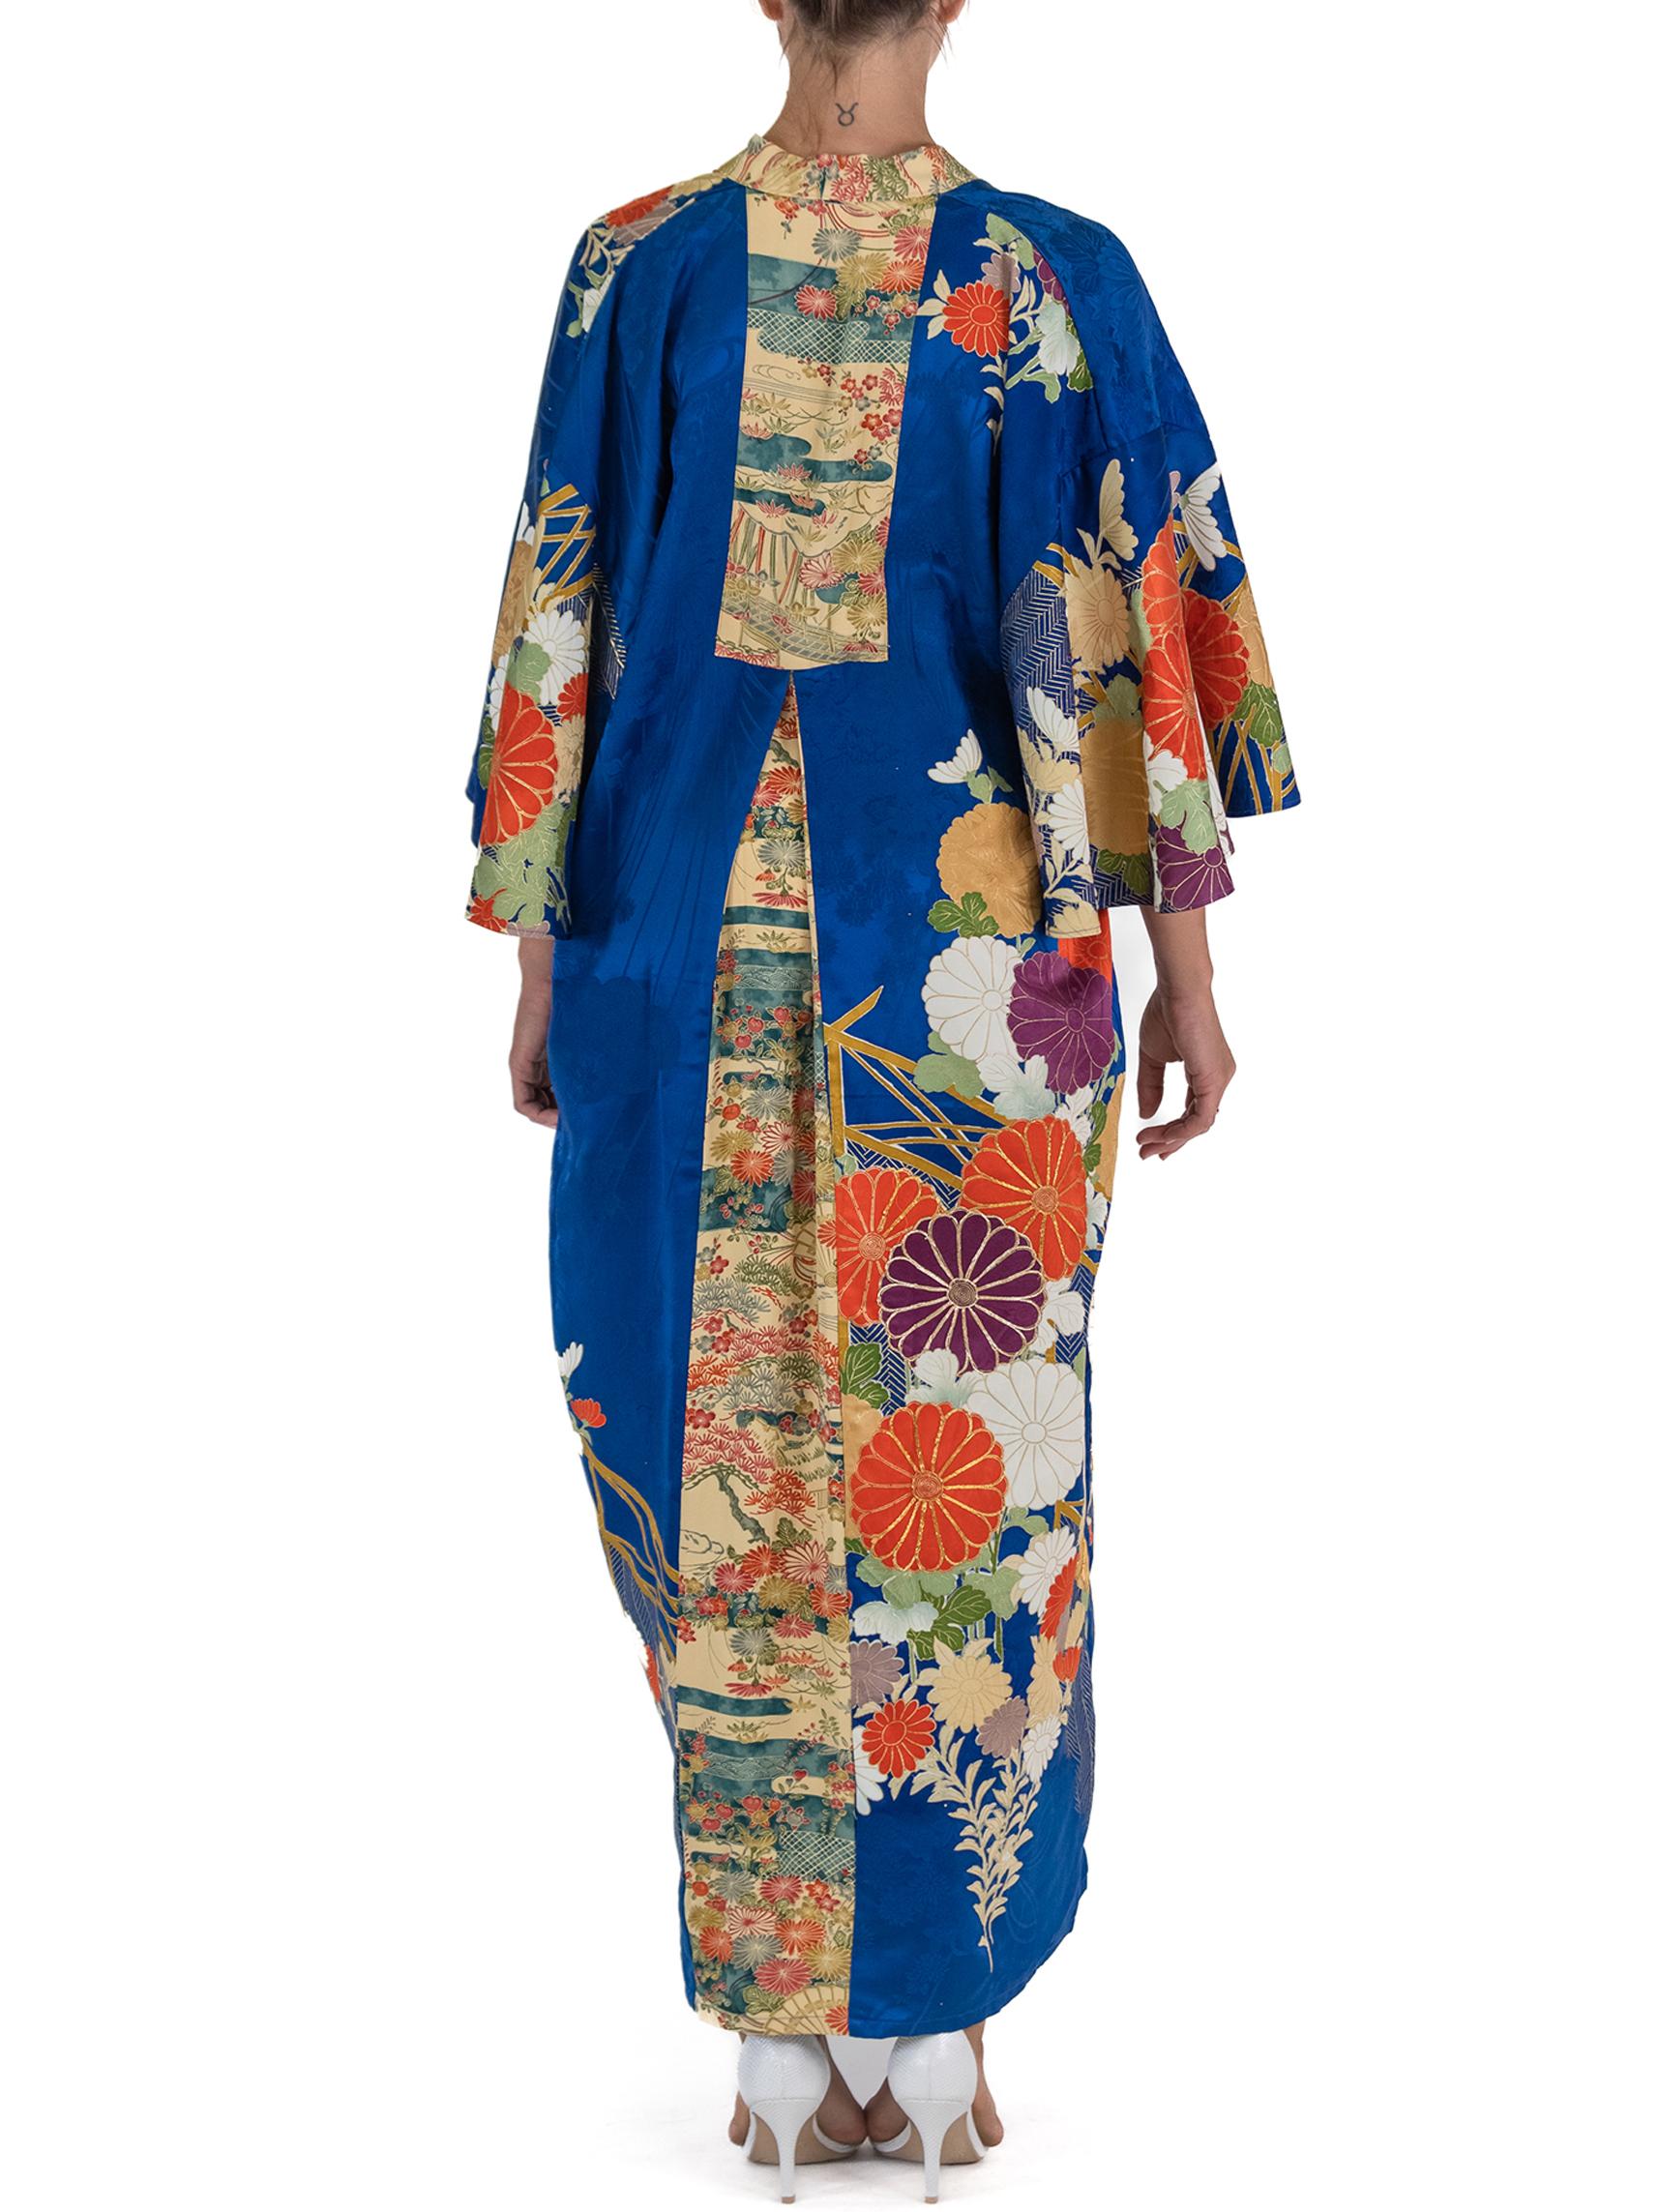 Morphew Collection Blue Yellow Garden Scene Trim Silk Kaftan
MORPHEW COLLECTION is made entirely by hand in our NYC Ateliér of rare antique materials sourced from around the globe. Our sustainable vintage materials represent over a century of